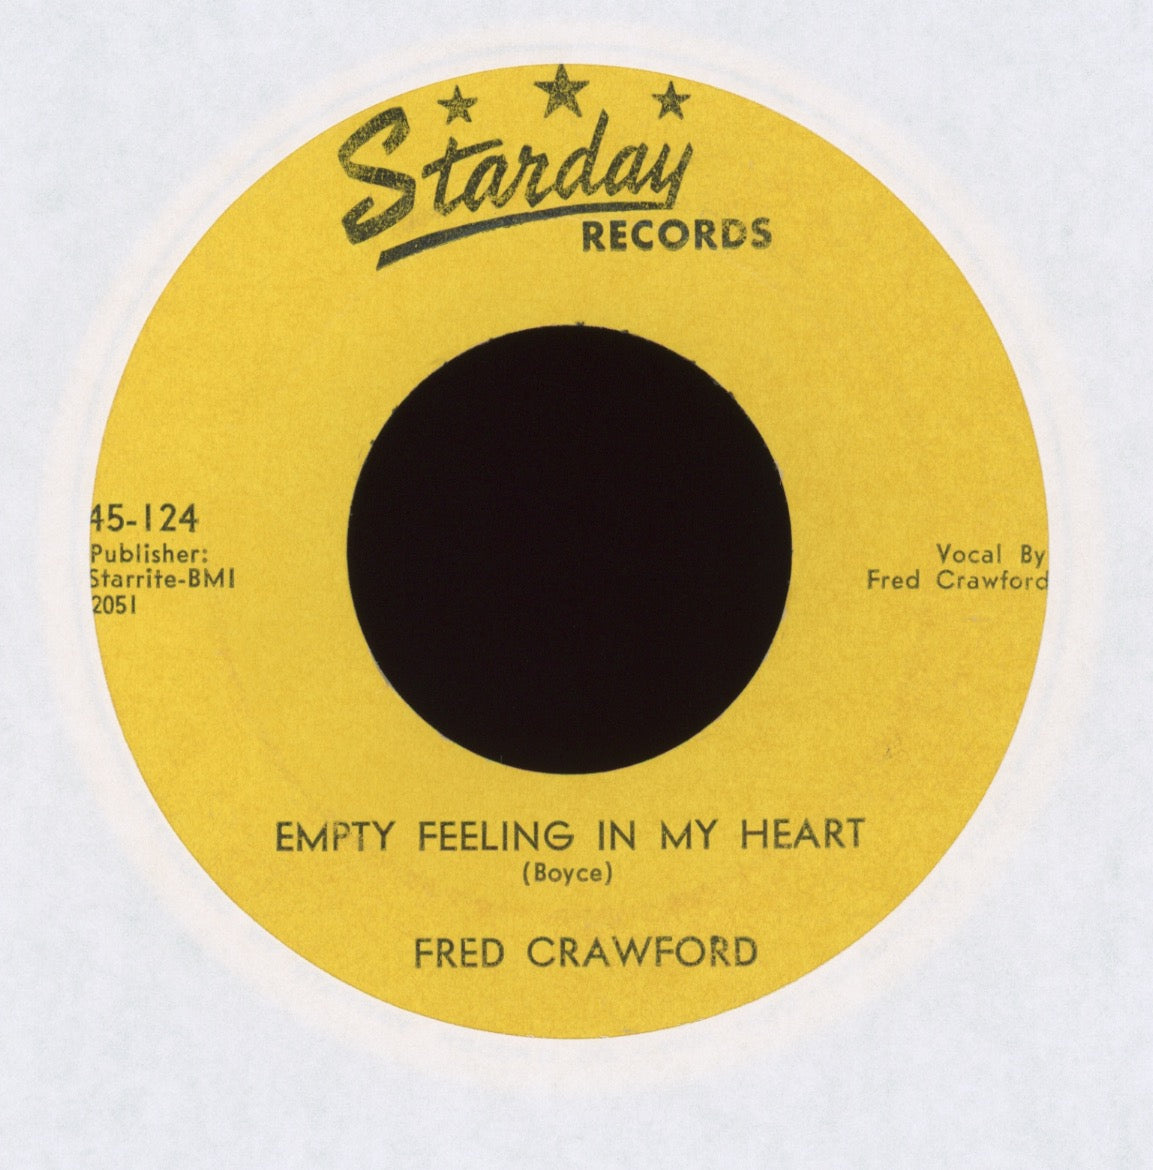 Fred Crawford - Time Will Take You Off My Mind on Starday